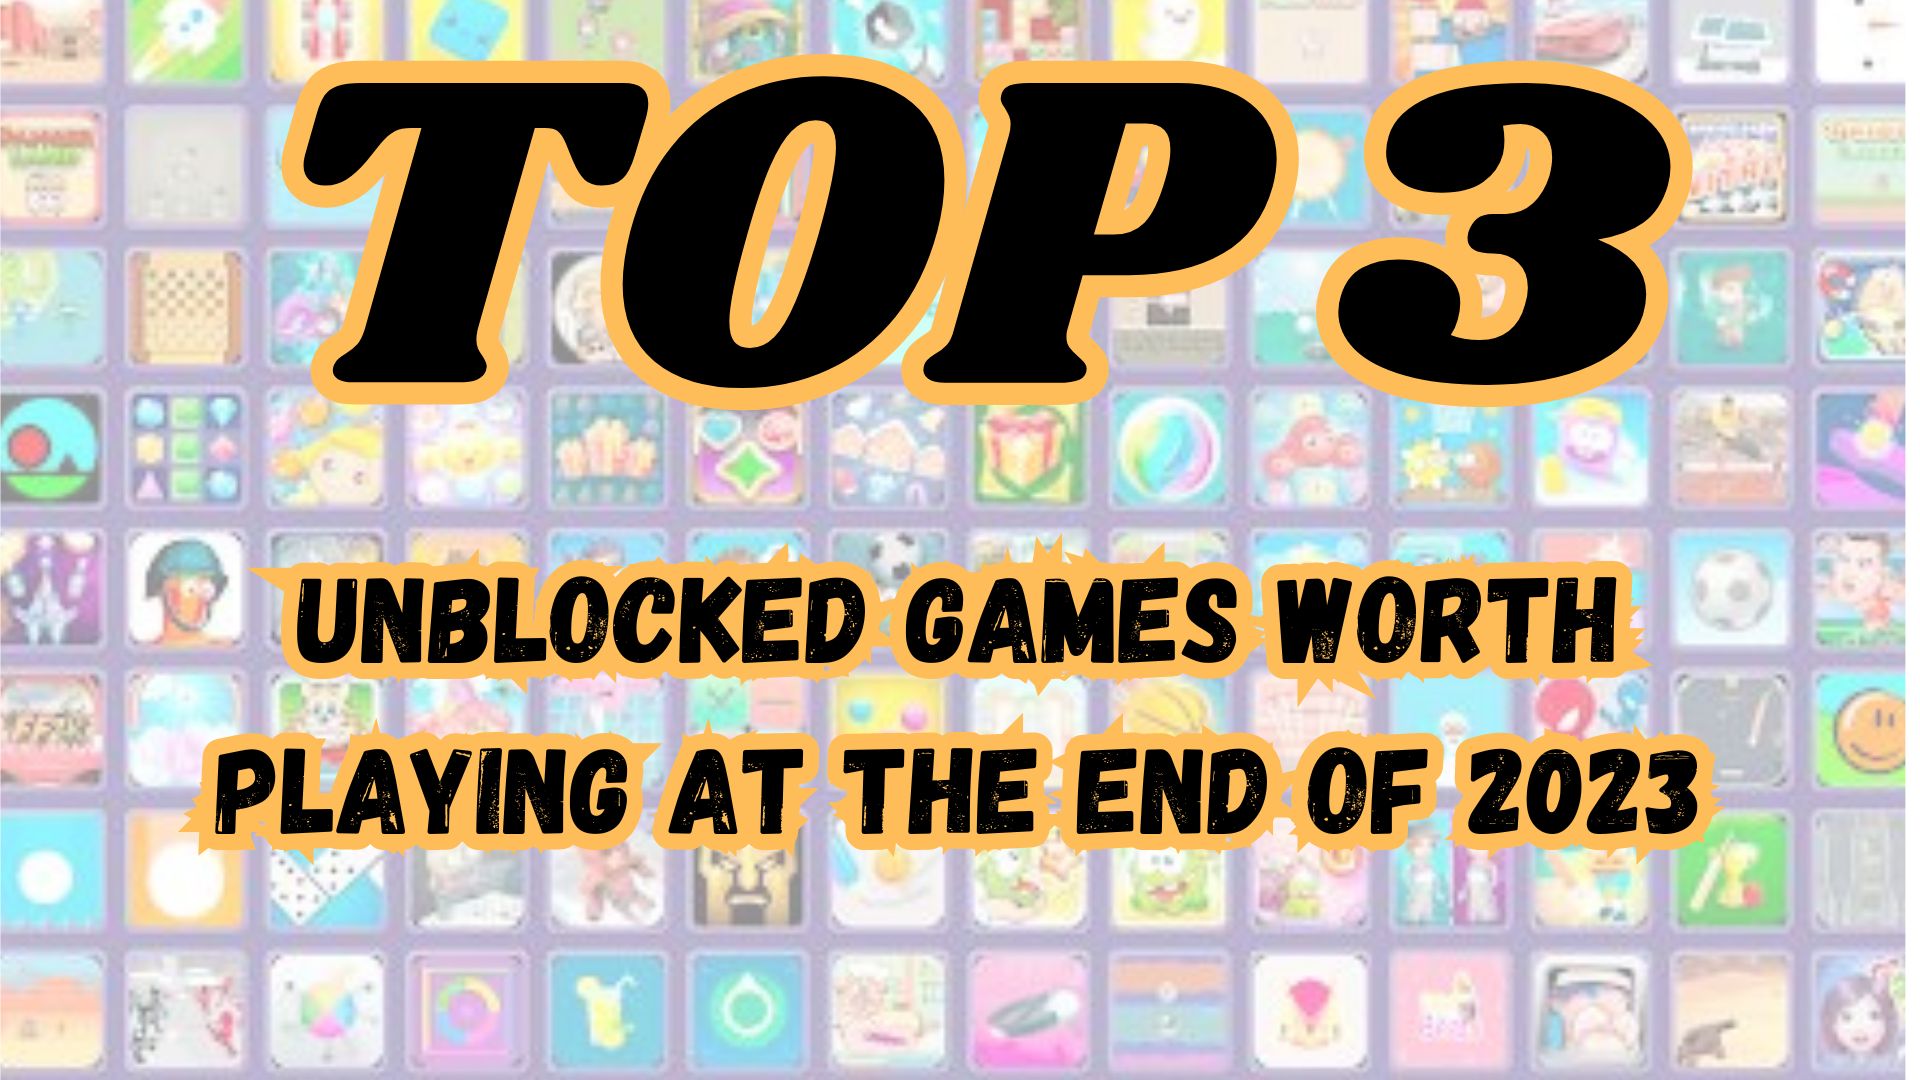 Top 3 Best Unblocked Games Worth Playing at the End of 2023